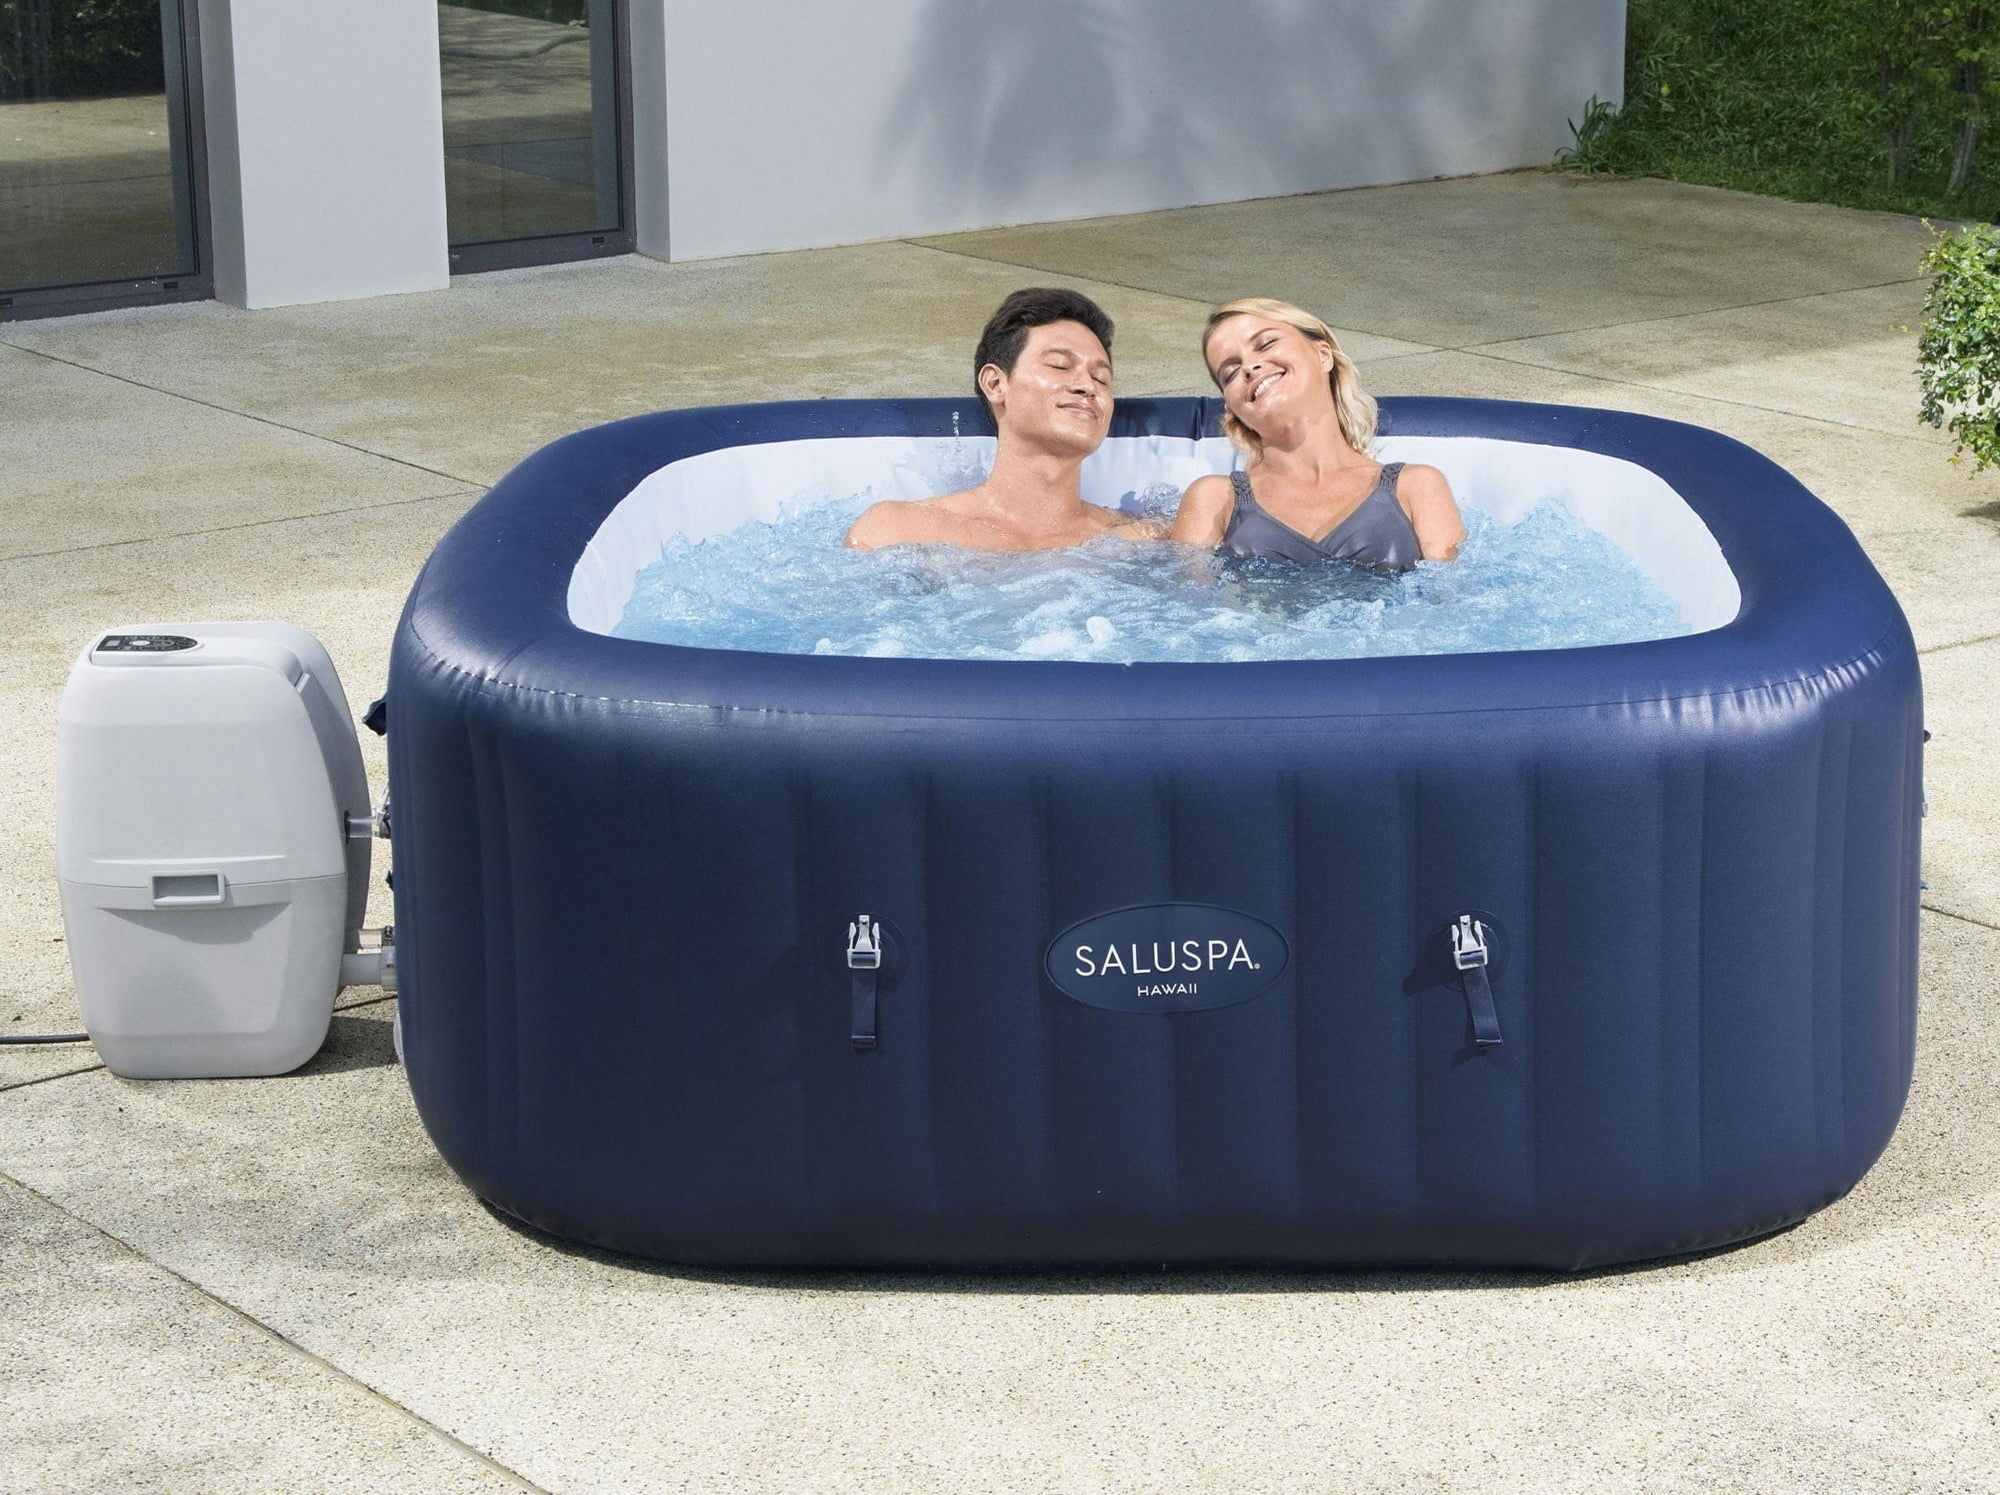 a couple sitting in the blue hot tub in a backyard